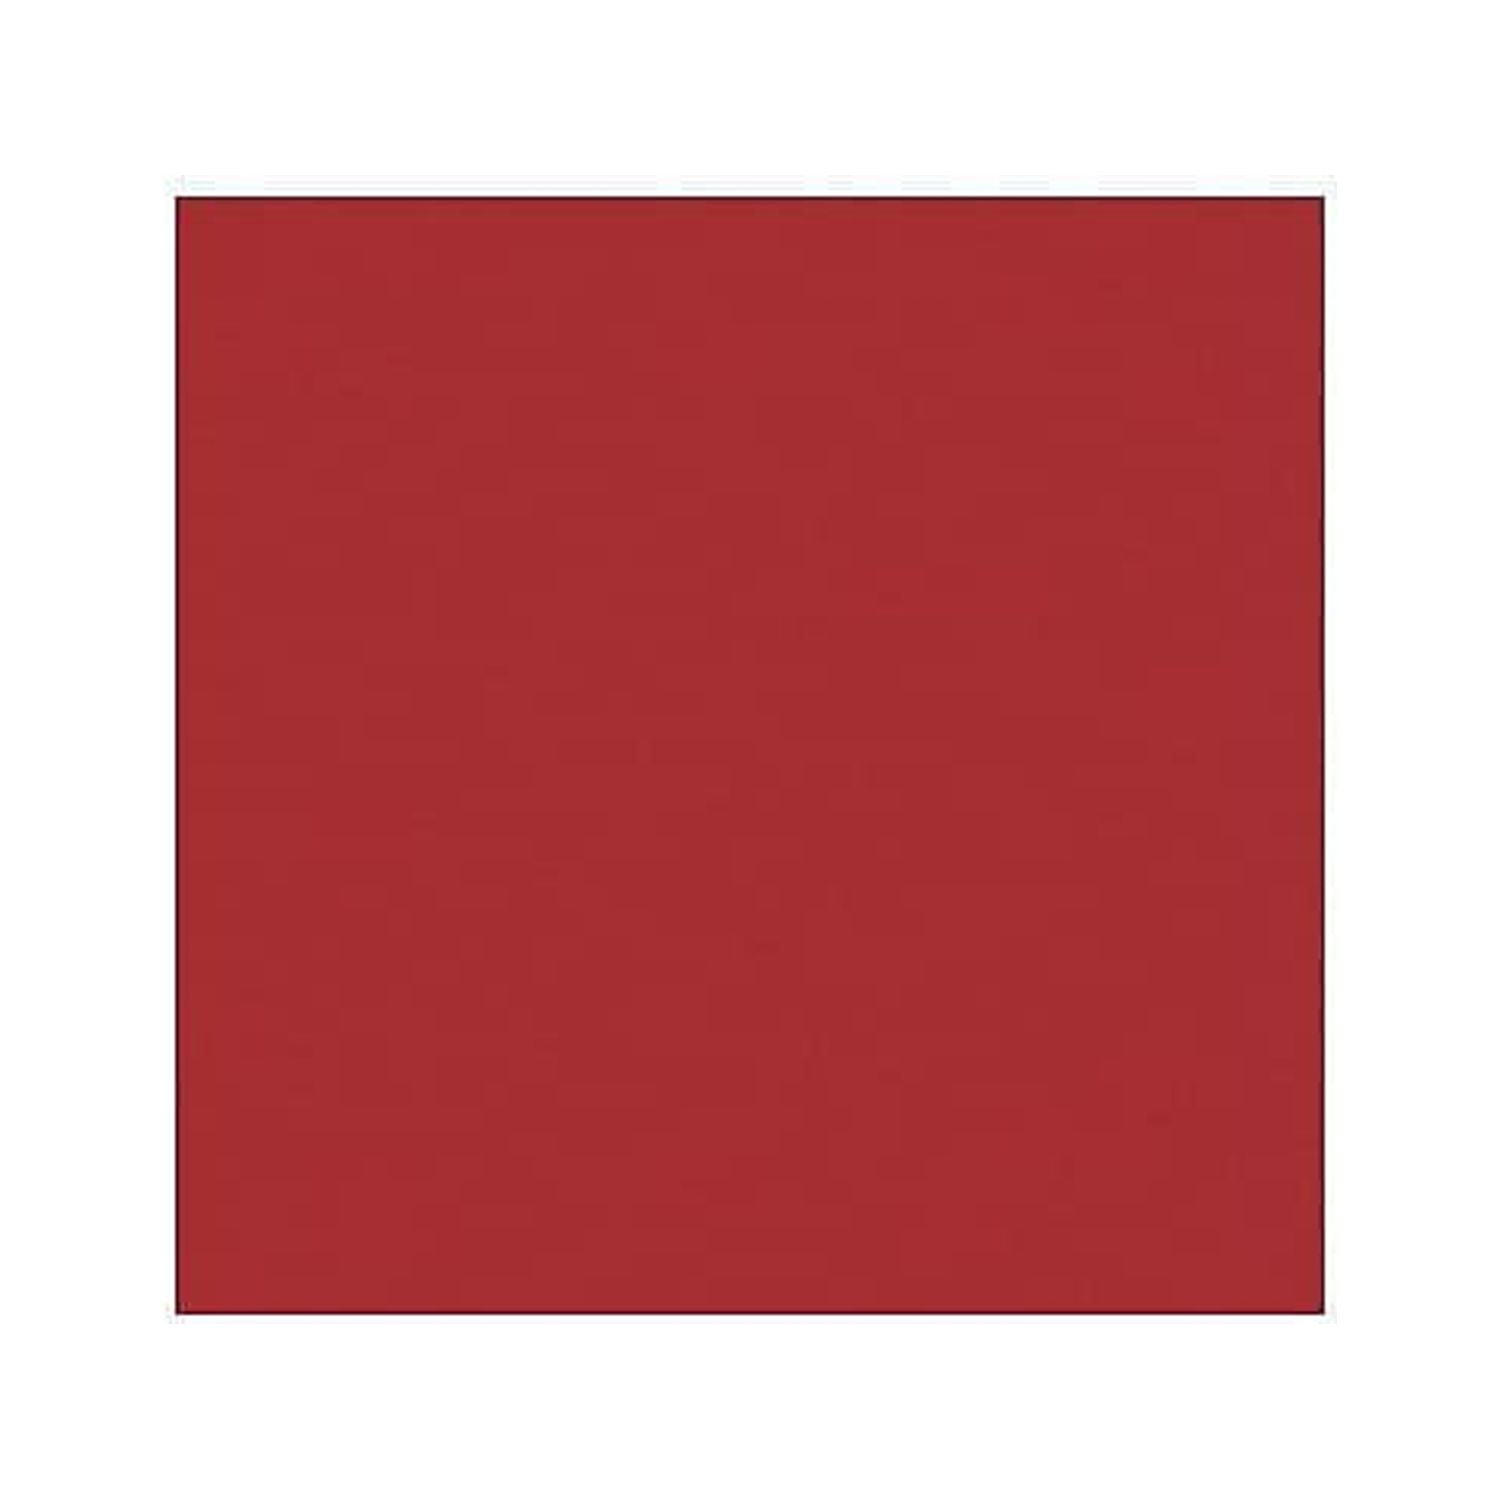  PA Paper Accents Glossy Cardstock 12 x 12 Red, 12pt